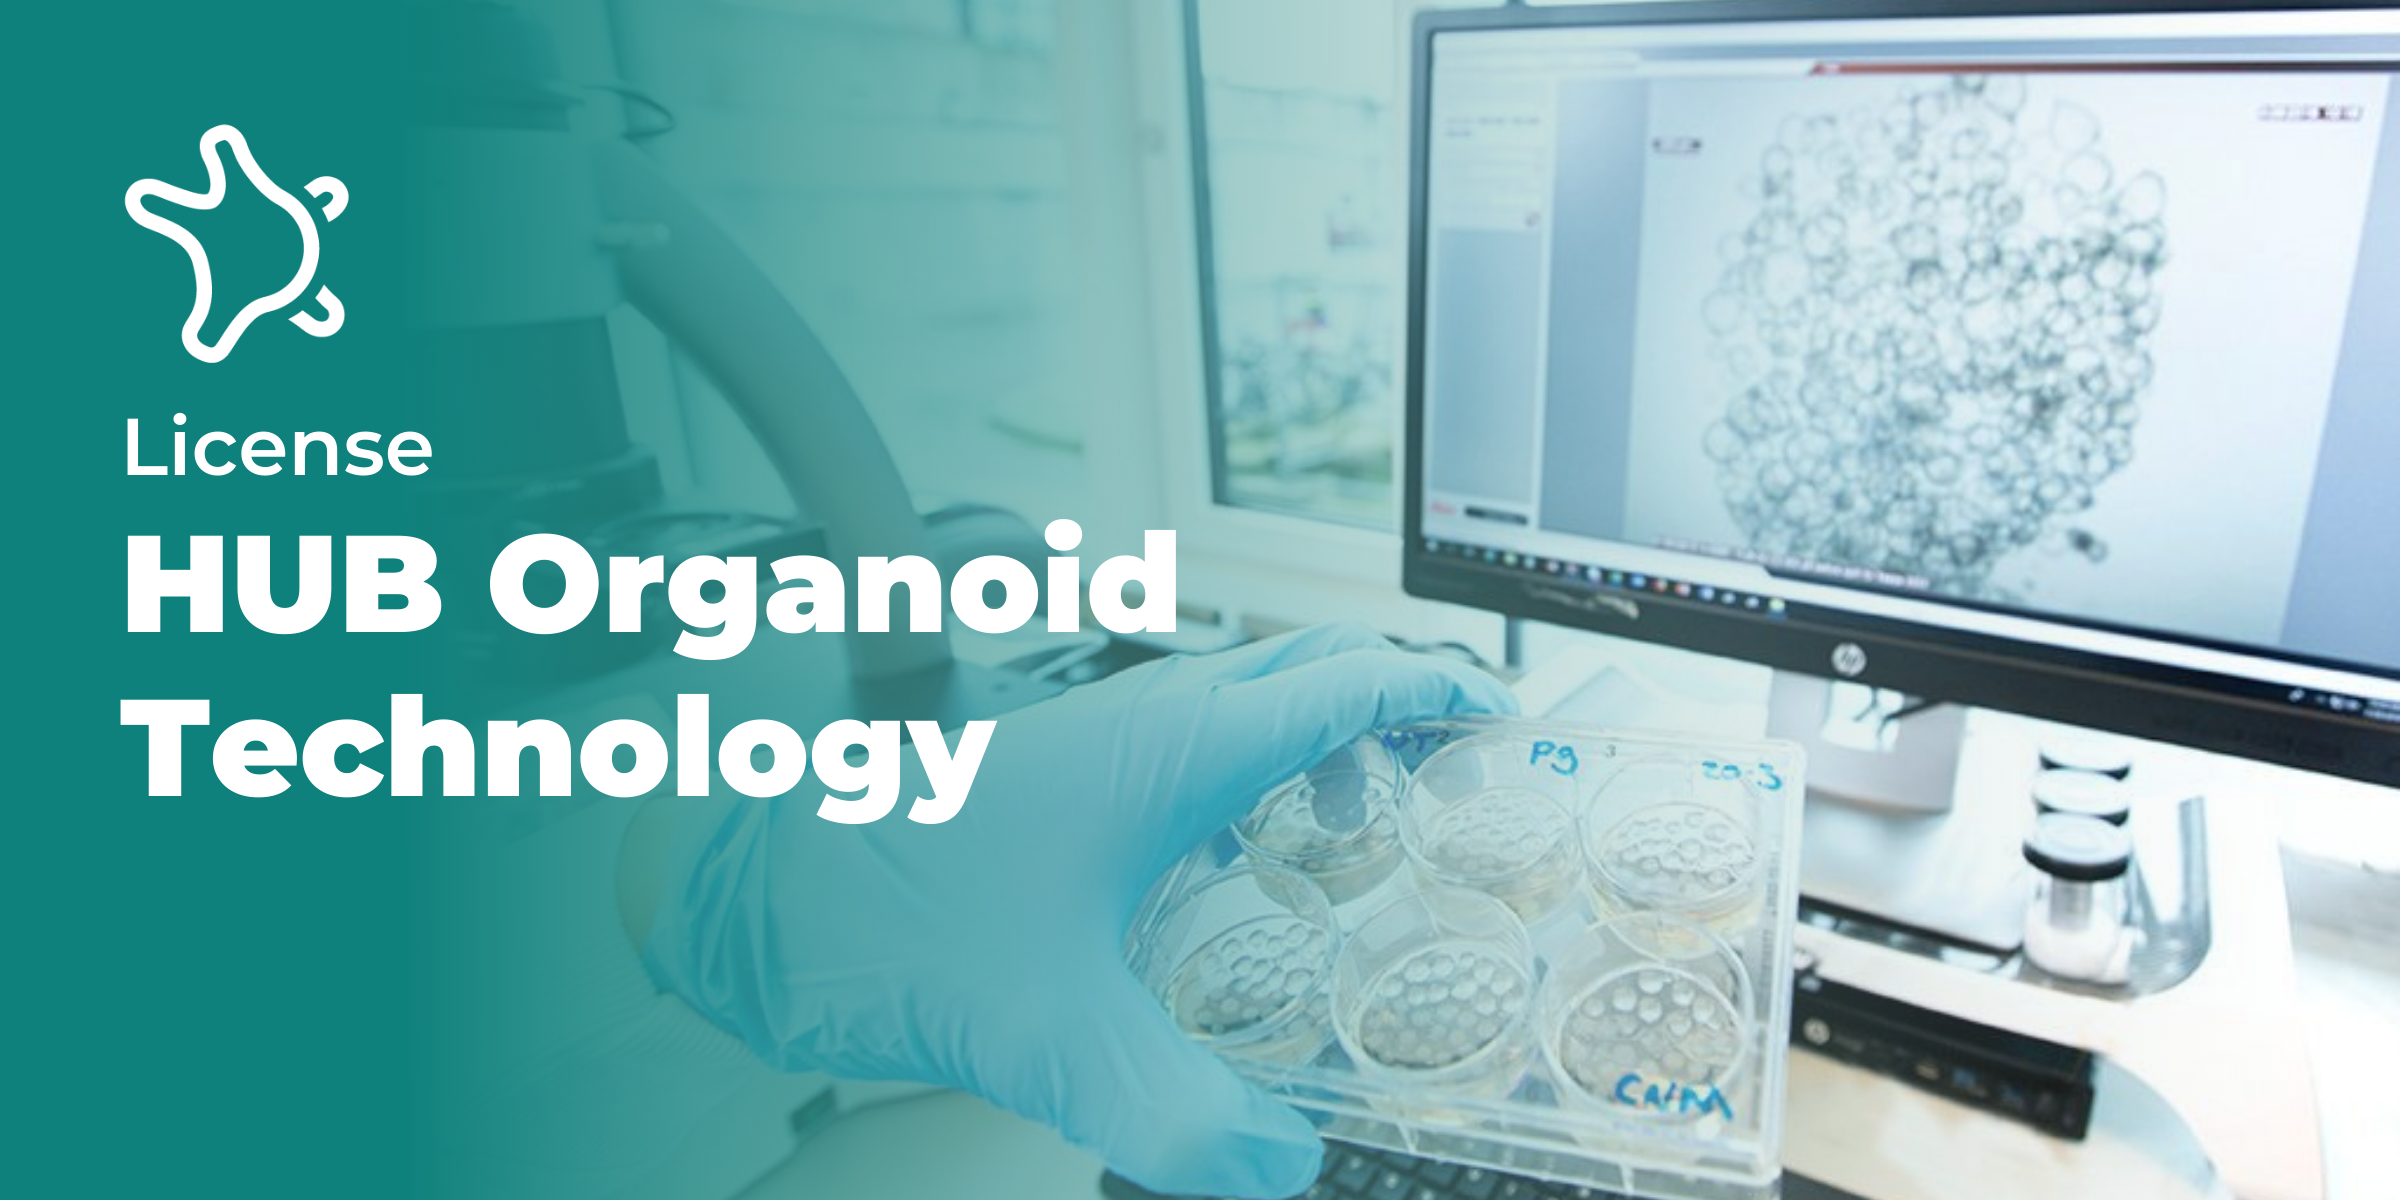 Do you need a license to work with HUB Organoid® Technology?